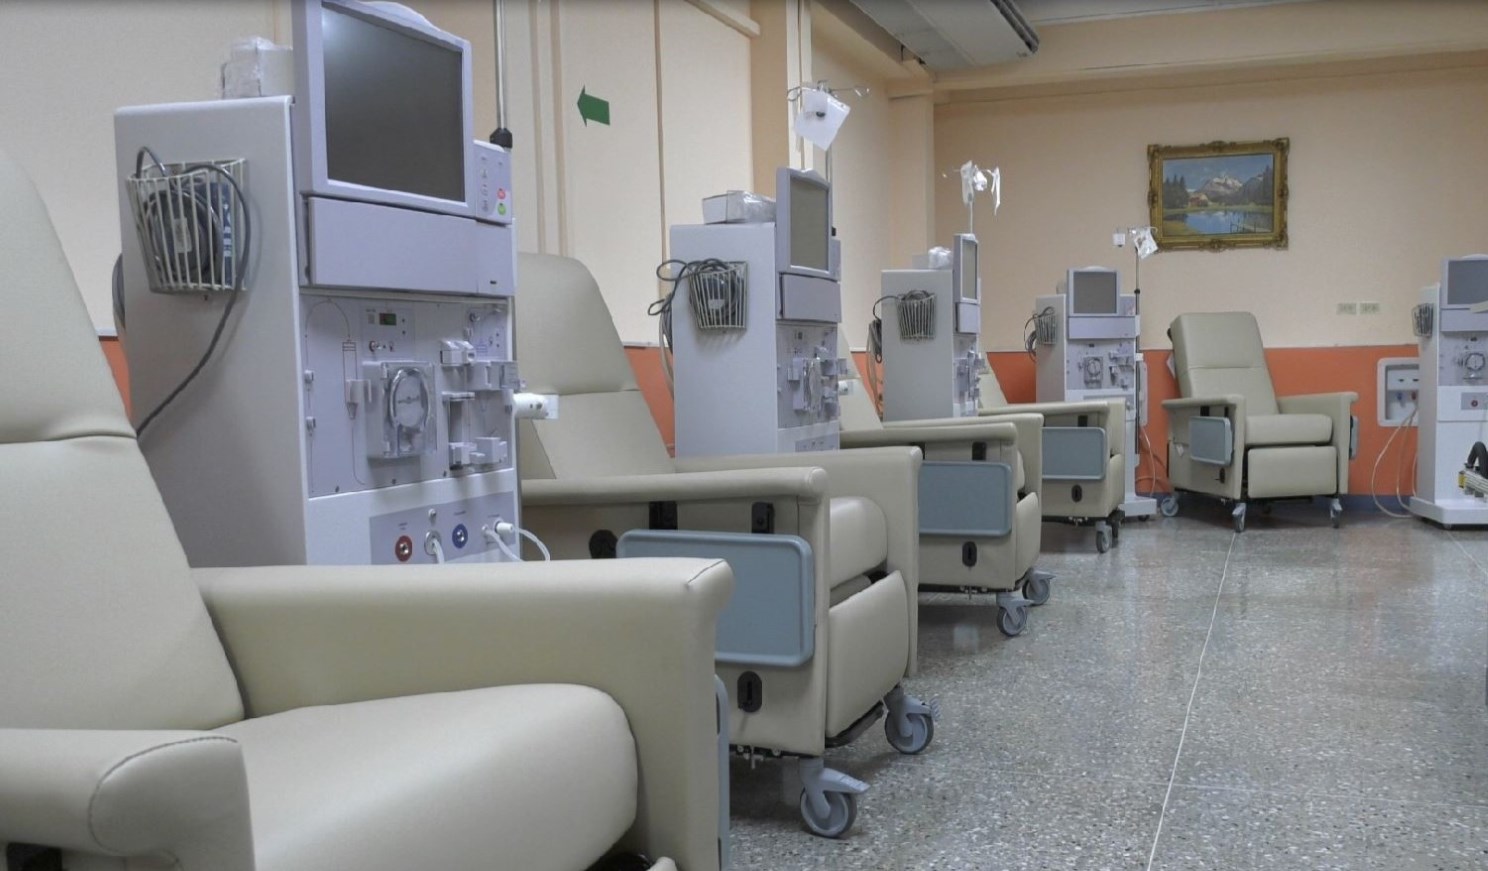 High Court orders the Cabinet to enable the construction of Renal Dialysis Centres at EWMSC and SFGH